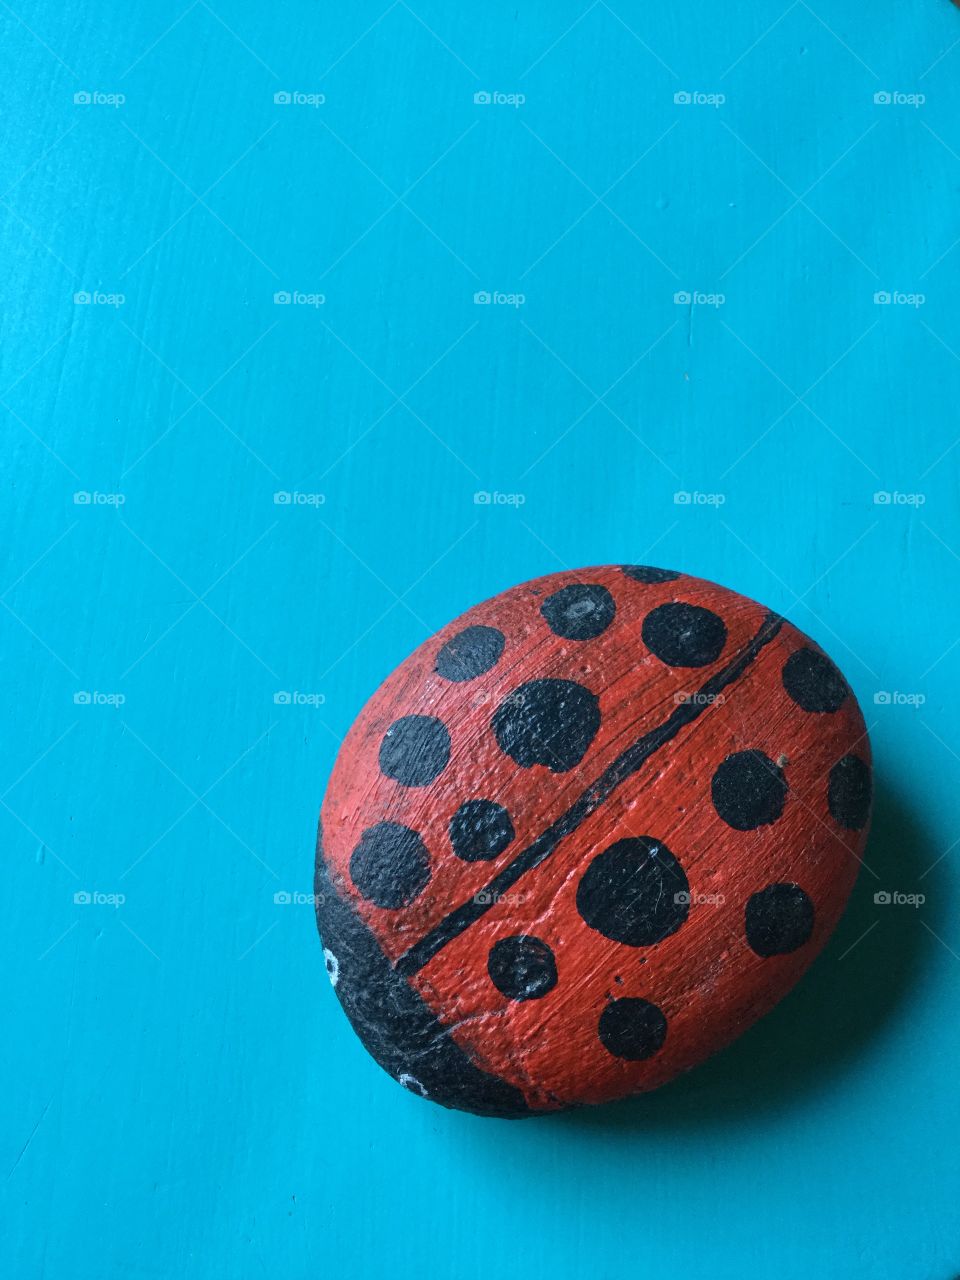 Blue background with stones painted as red ladybug with black spots. 